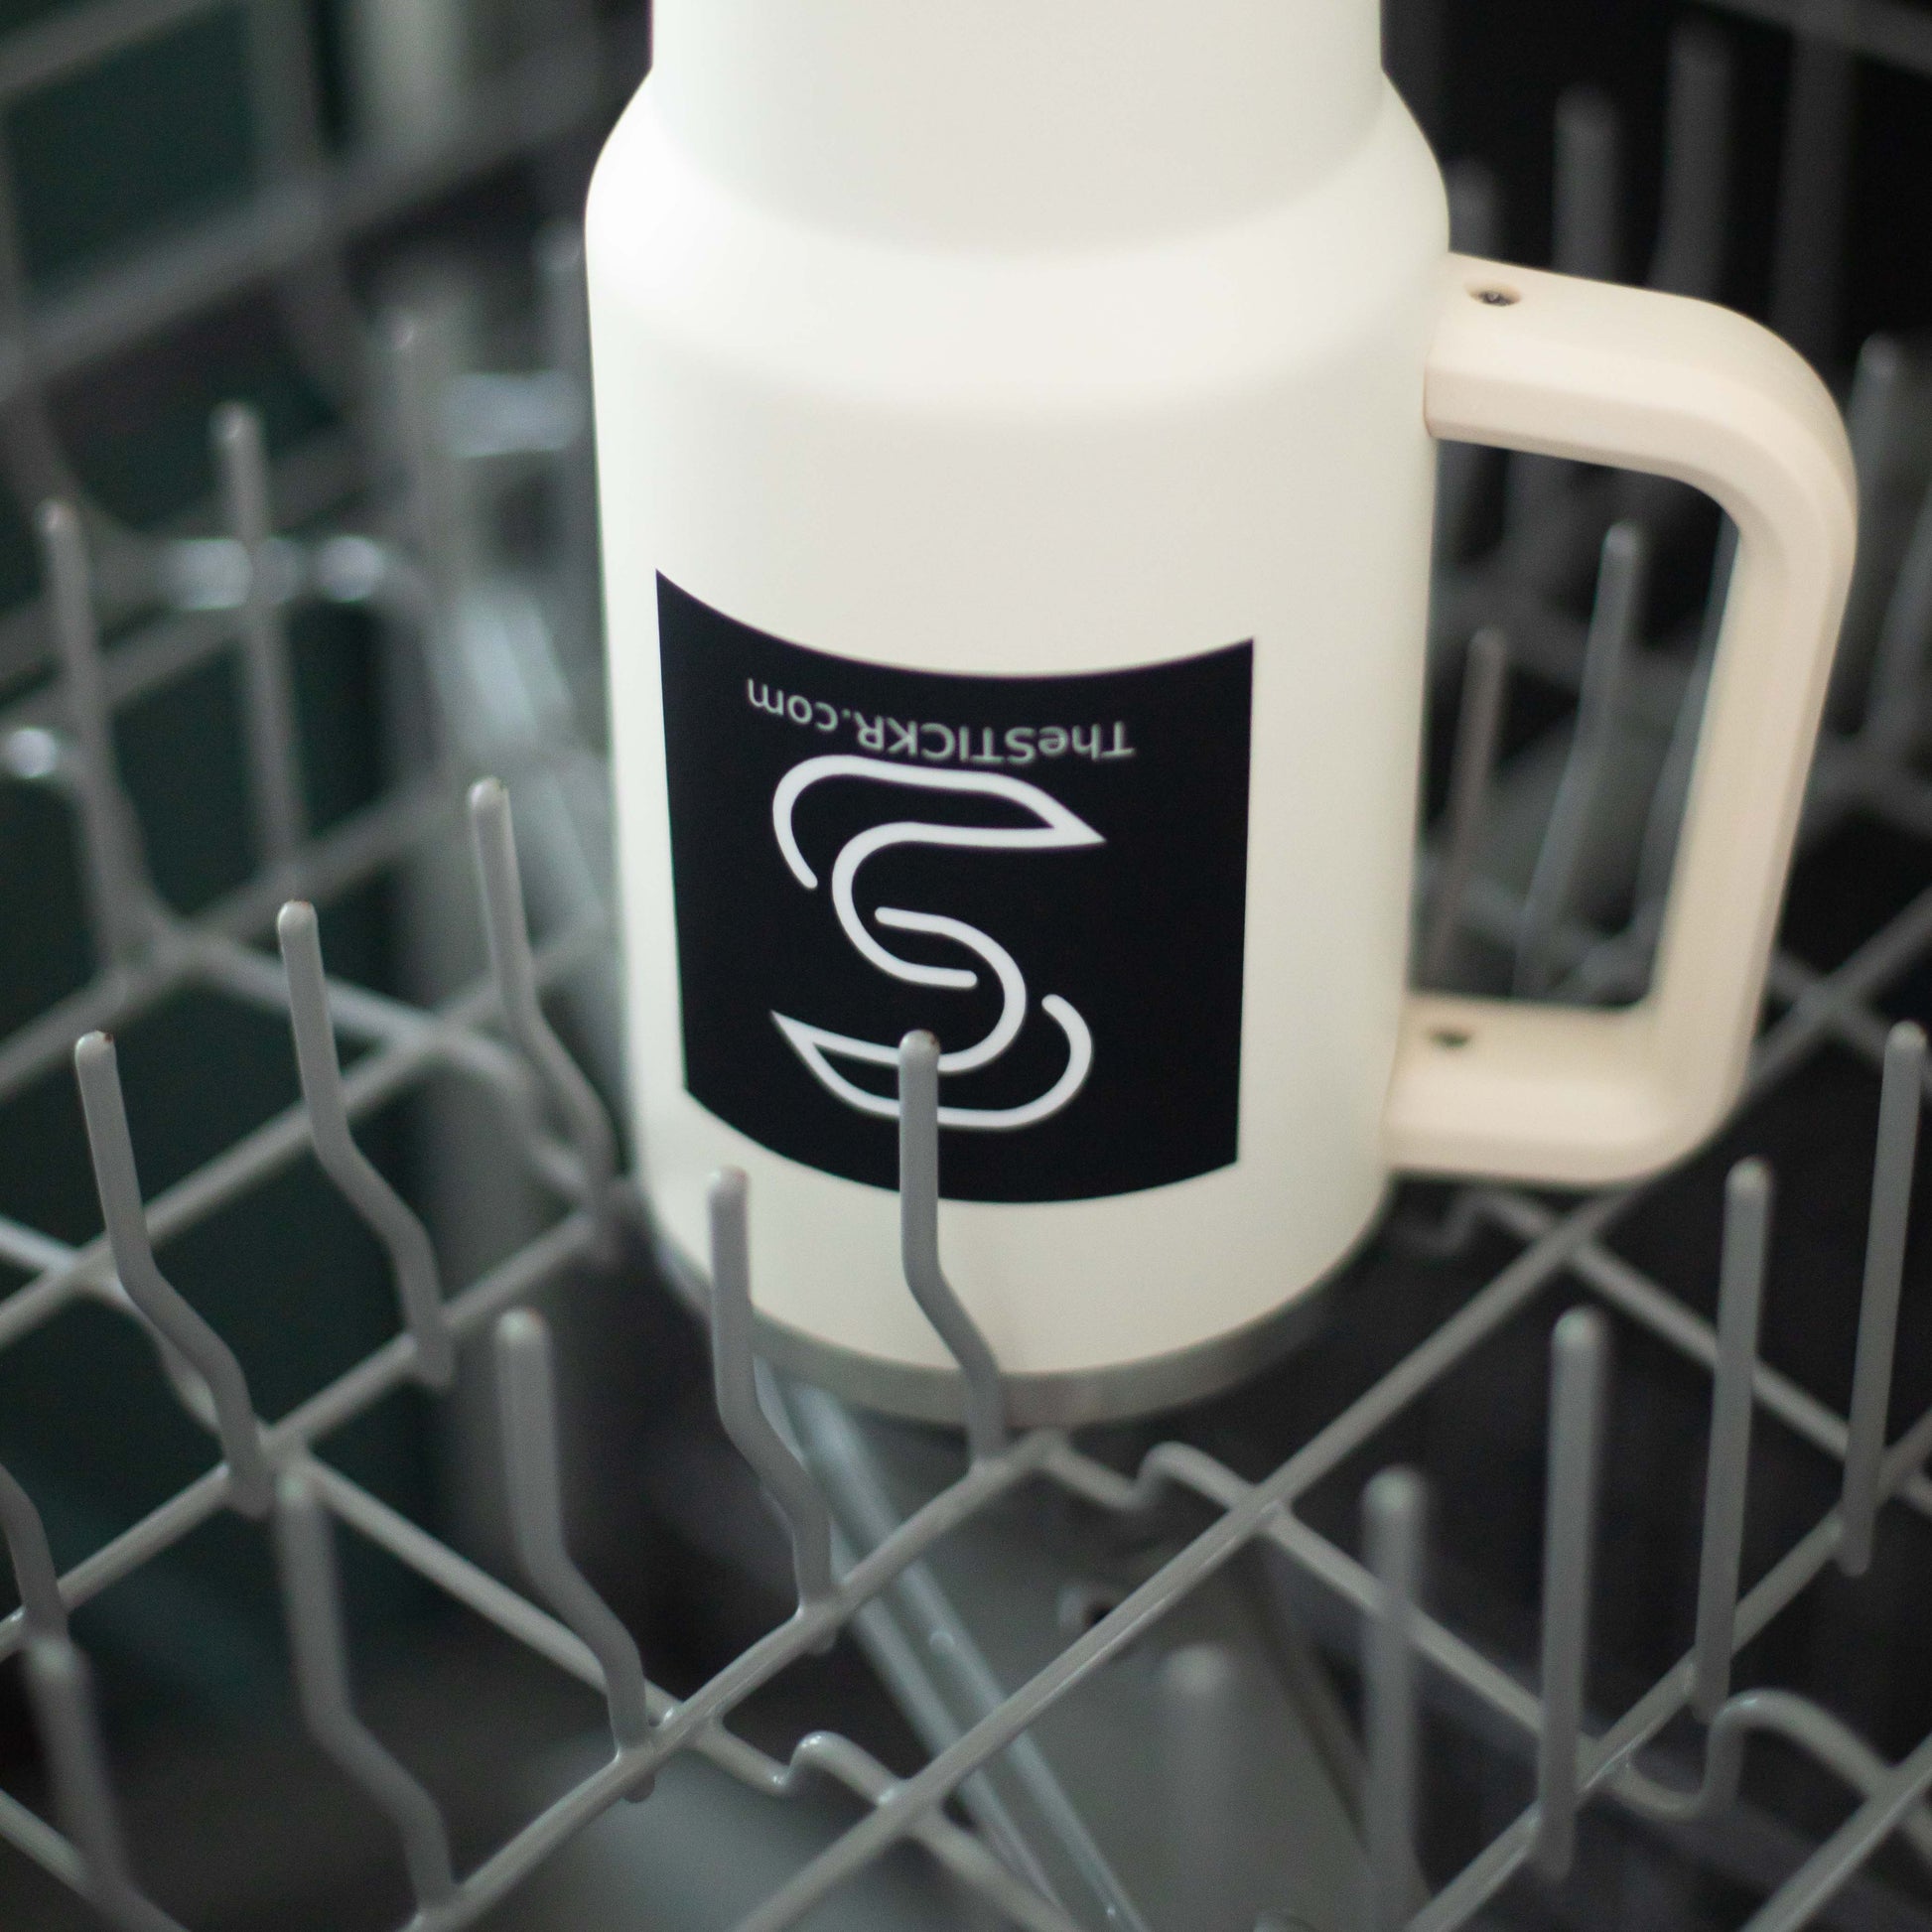 A square-shaped black vinyl sticker with the Stickr logo and website on a water bottle in a dishwasher